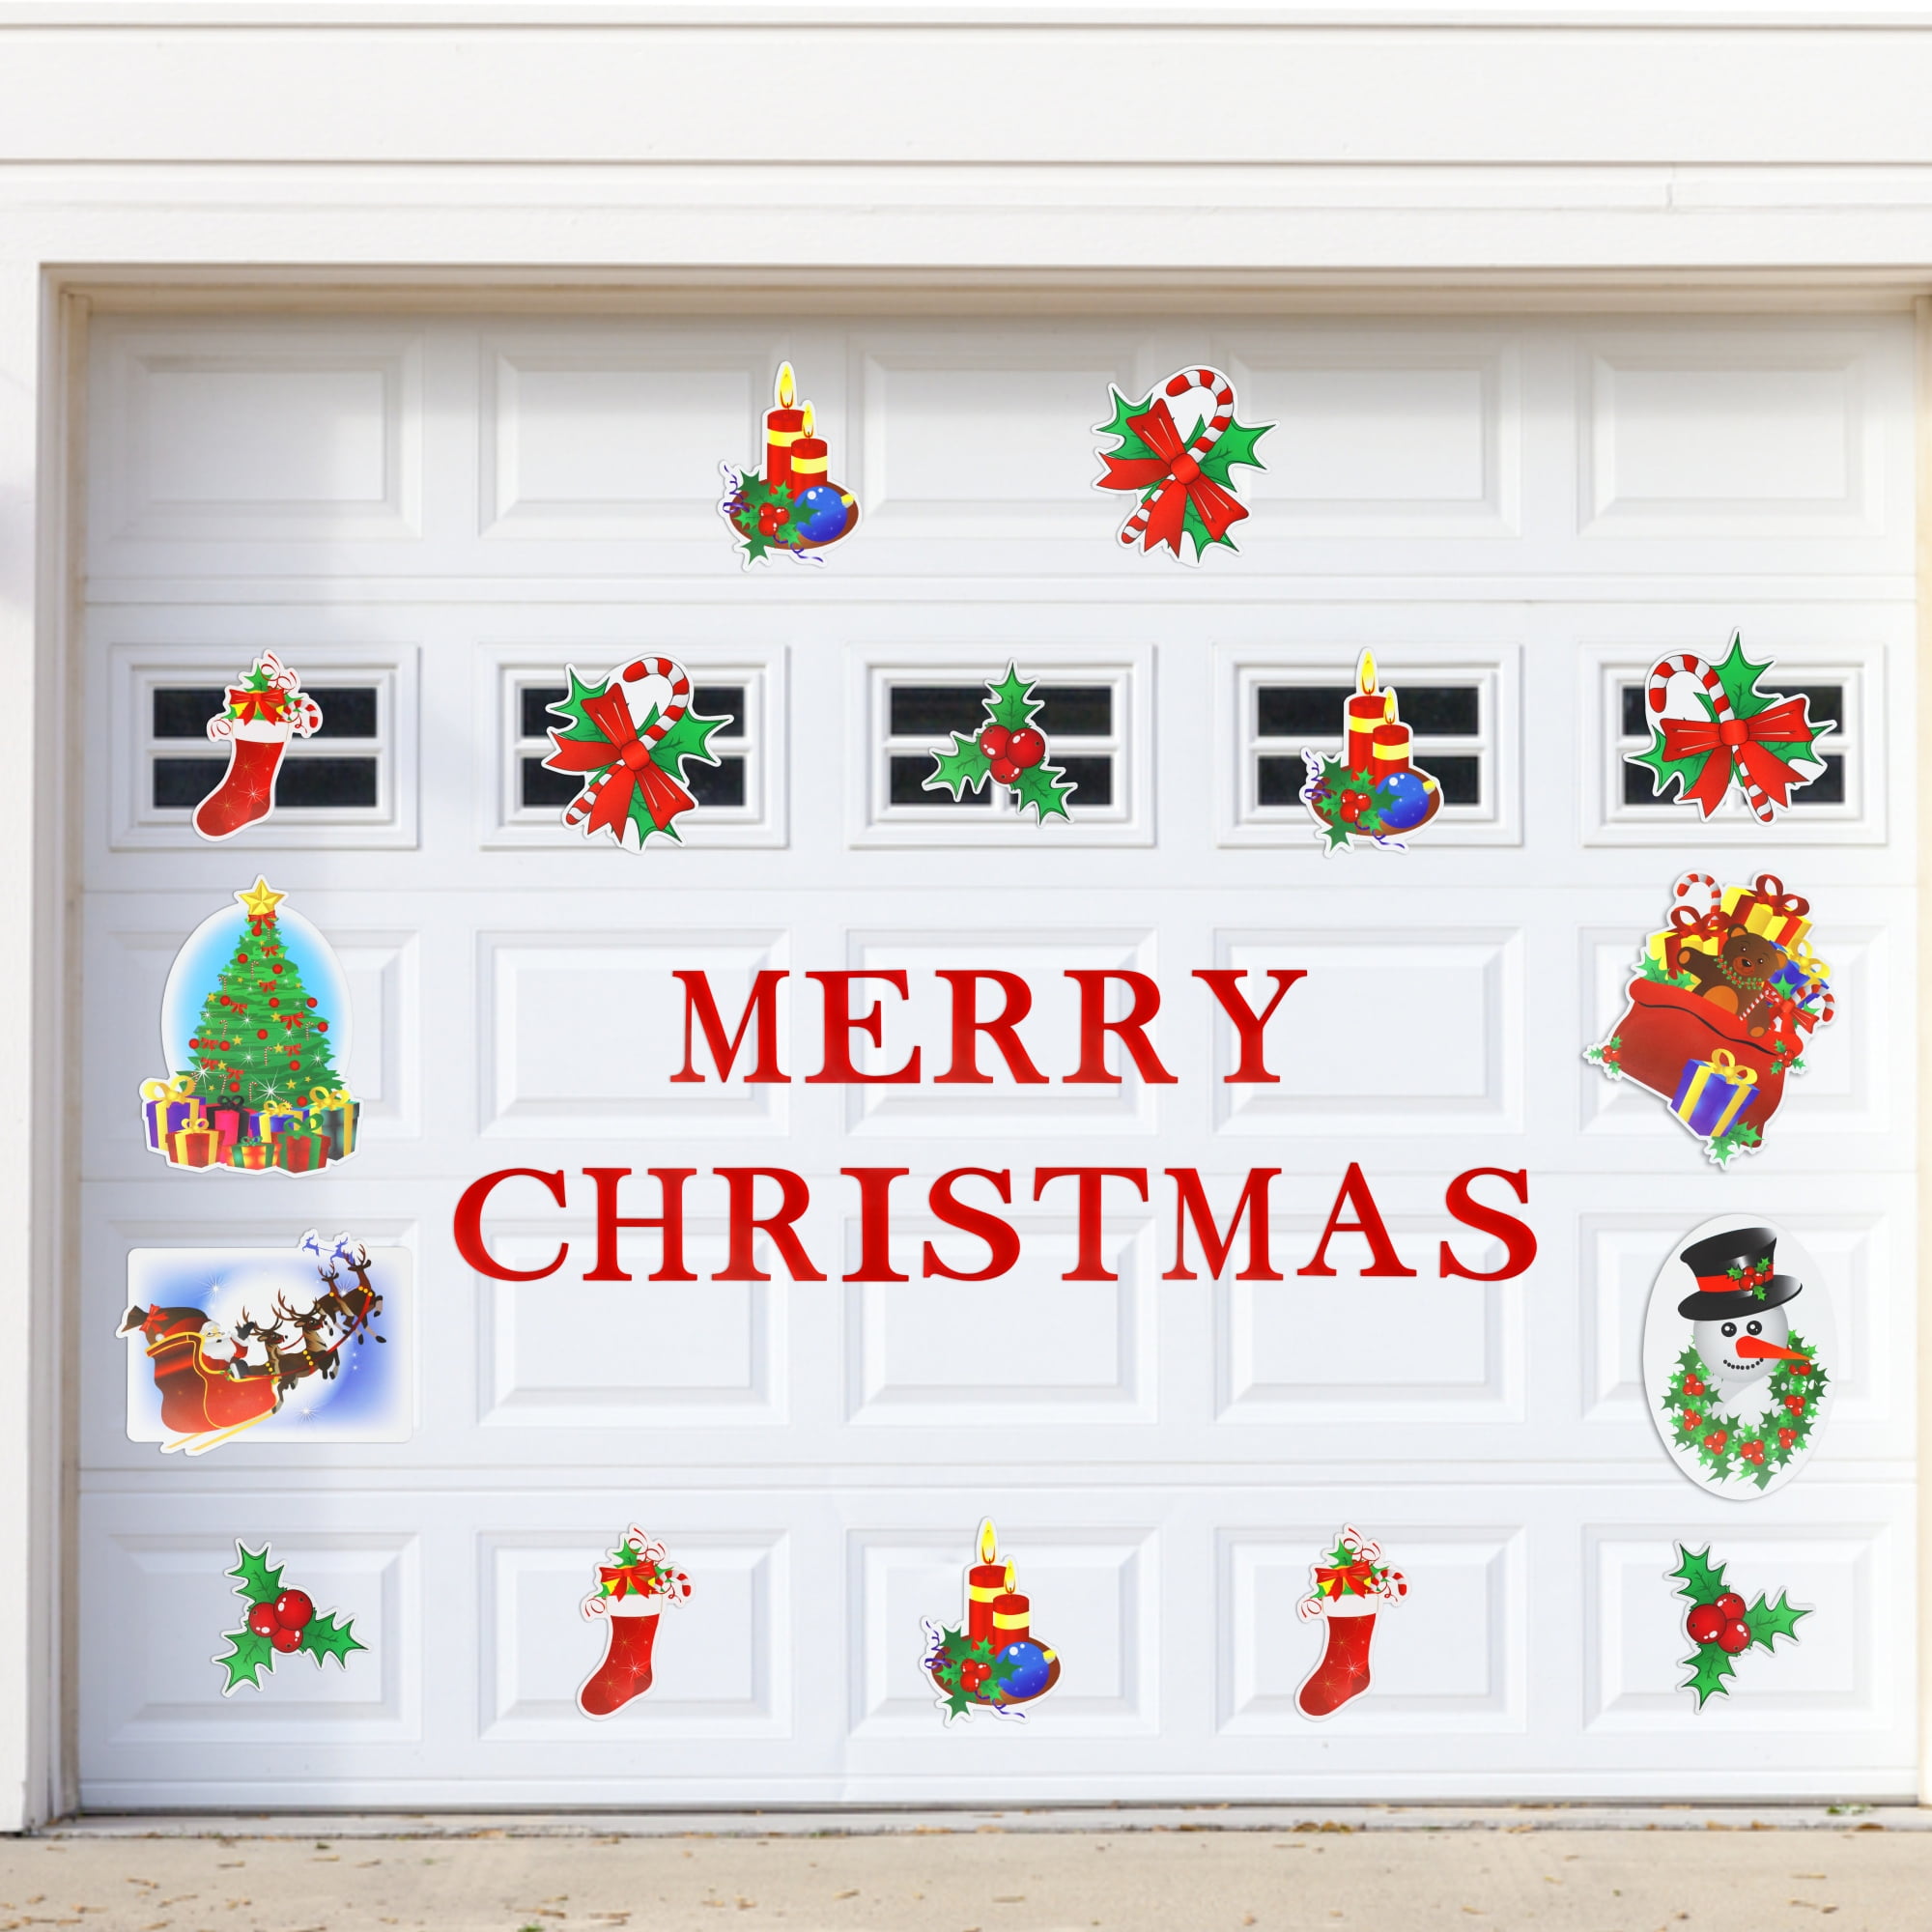 Christmas Garage Door Magnets Baffulo Plaid Outdoor Magnets Stickers Xmas Refrigerator Decal Car Party Decor Balcony Decorate for Christmas Supplies 